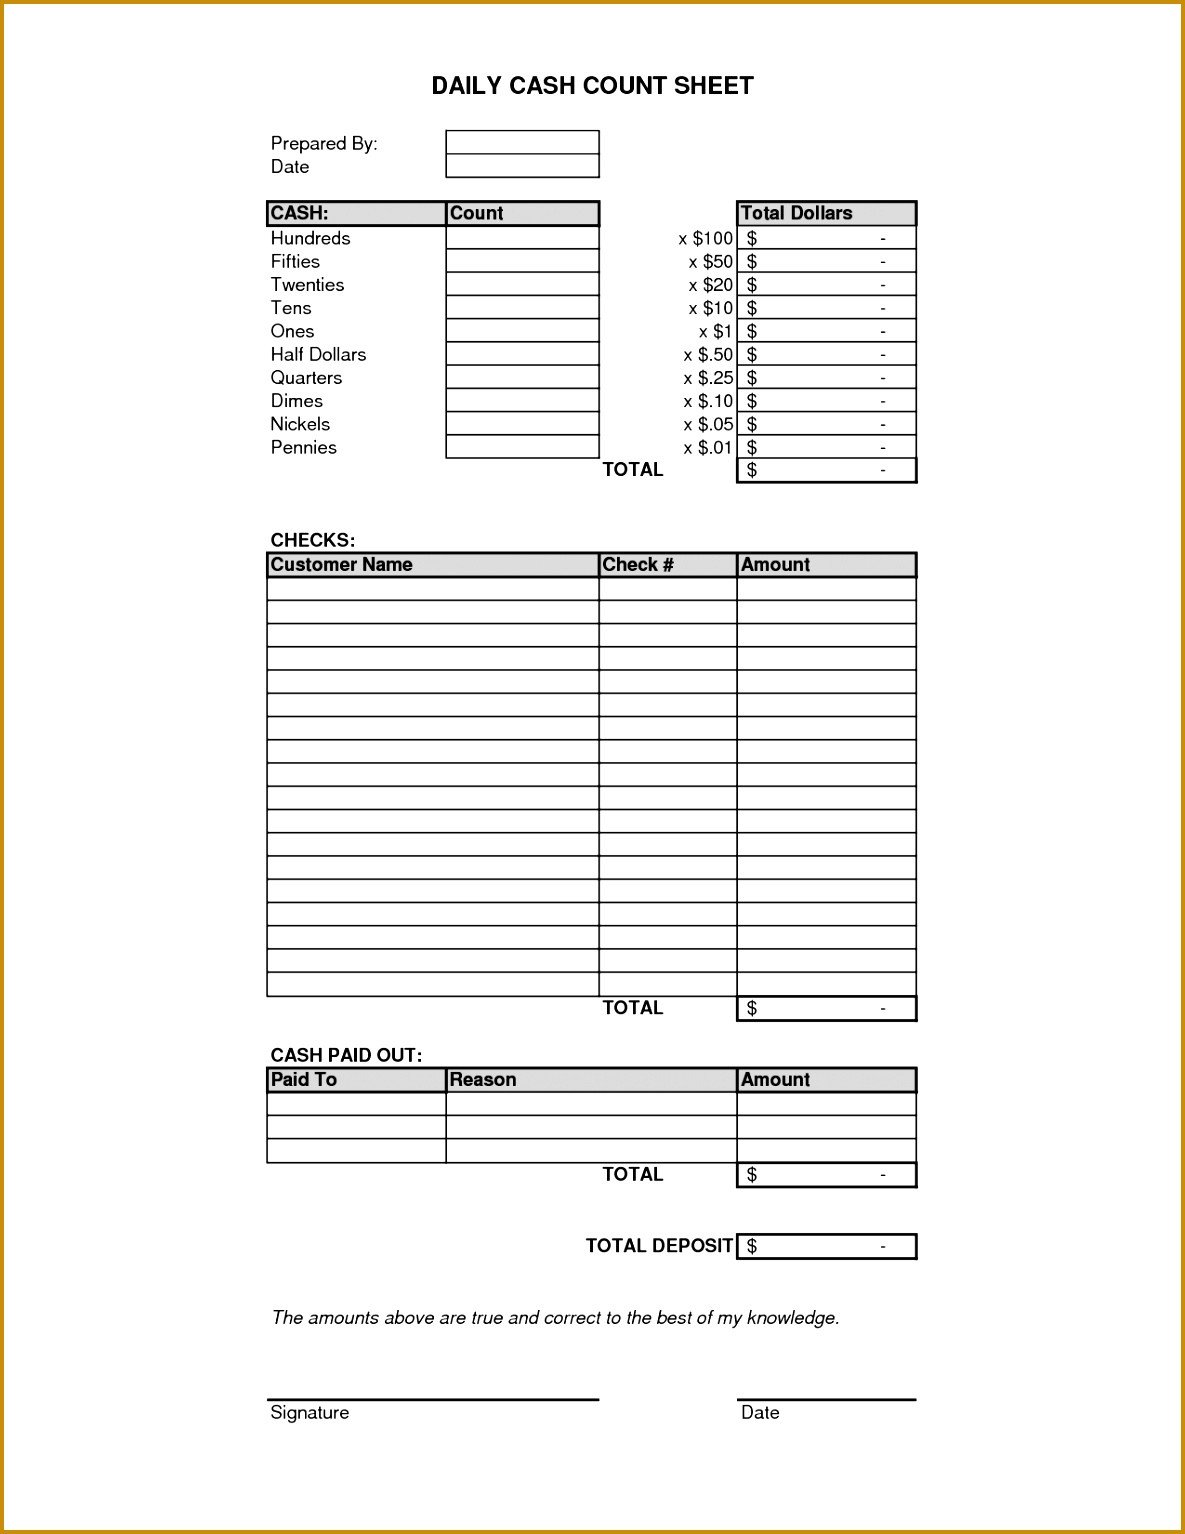 Cash Drawer Count Sheet Template 7 Petty Cash Count Sheet Template